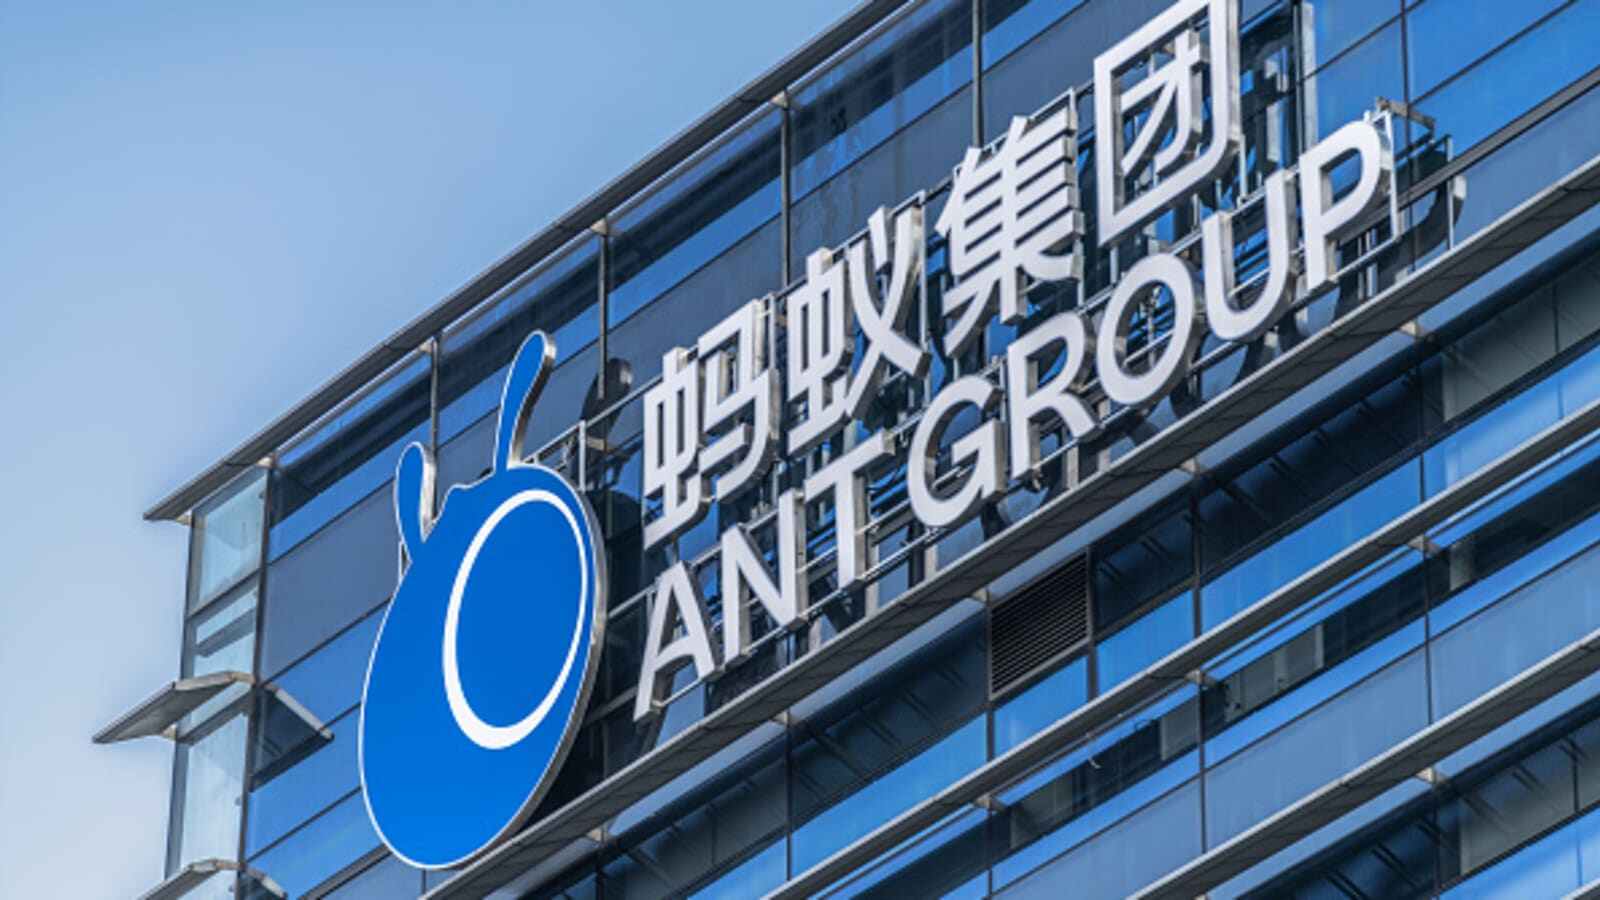 Ant Group approved by regulator to start consumer lending business, a key first step in restructuring